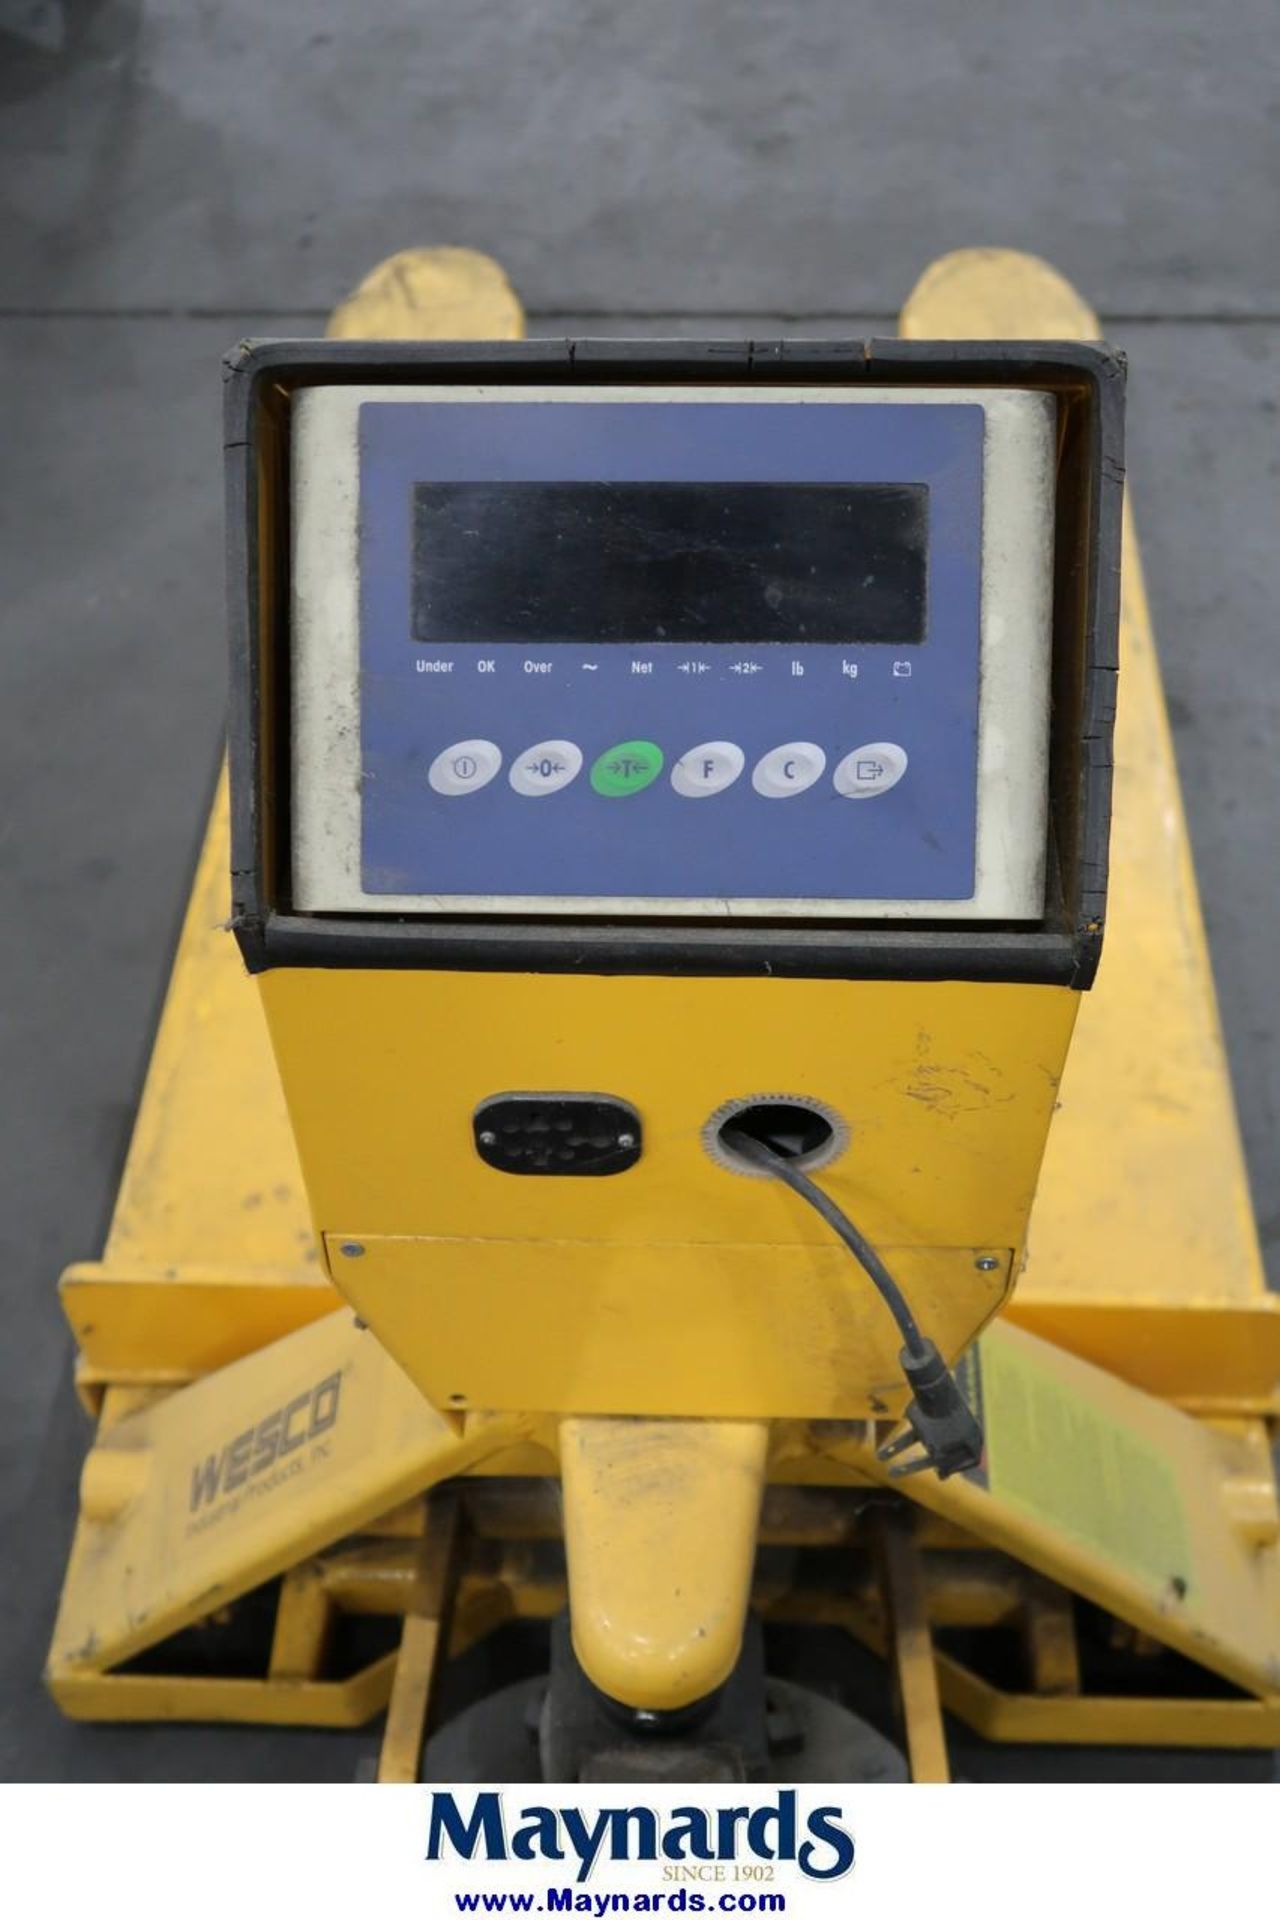 Wesco 5,000 Lb. Capacity Pallet Jack with Digital Weigh Scale - Image 2 of 2